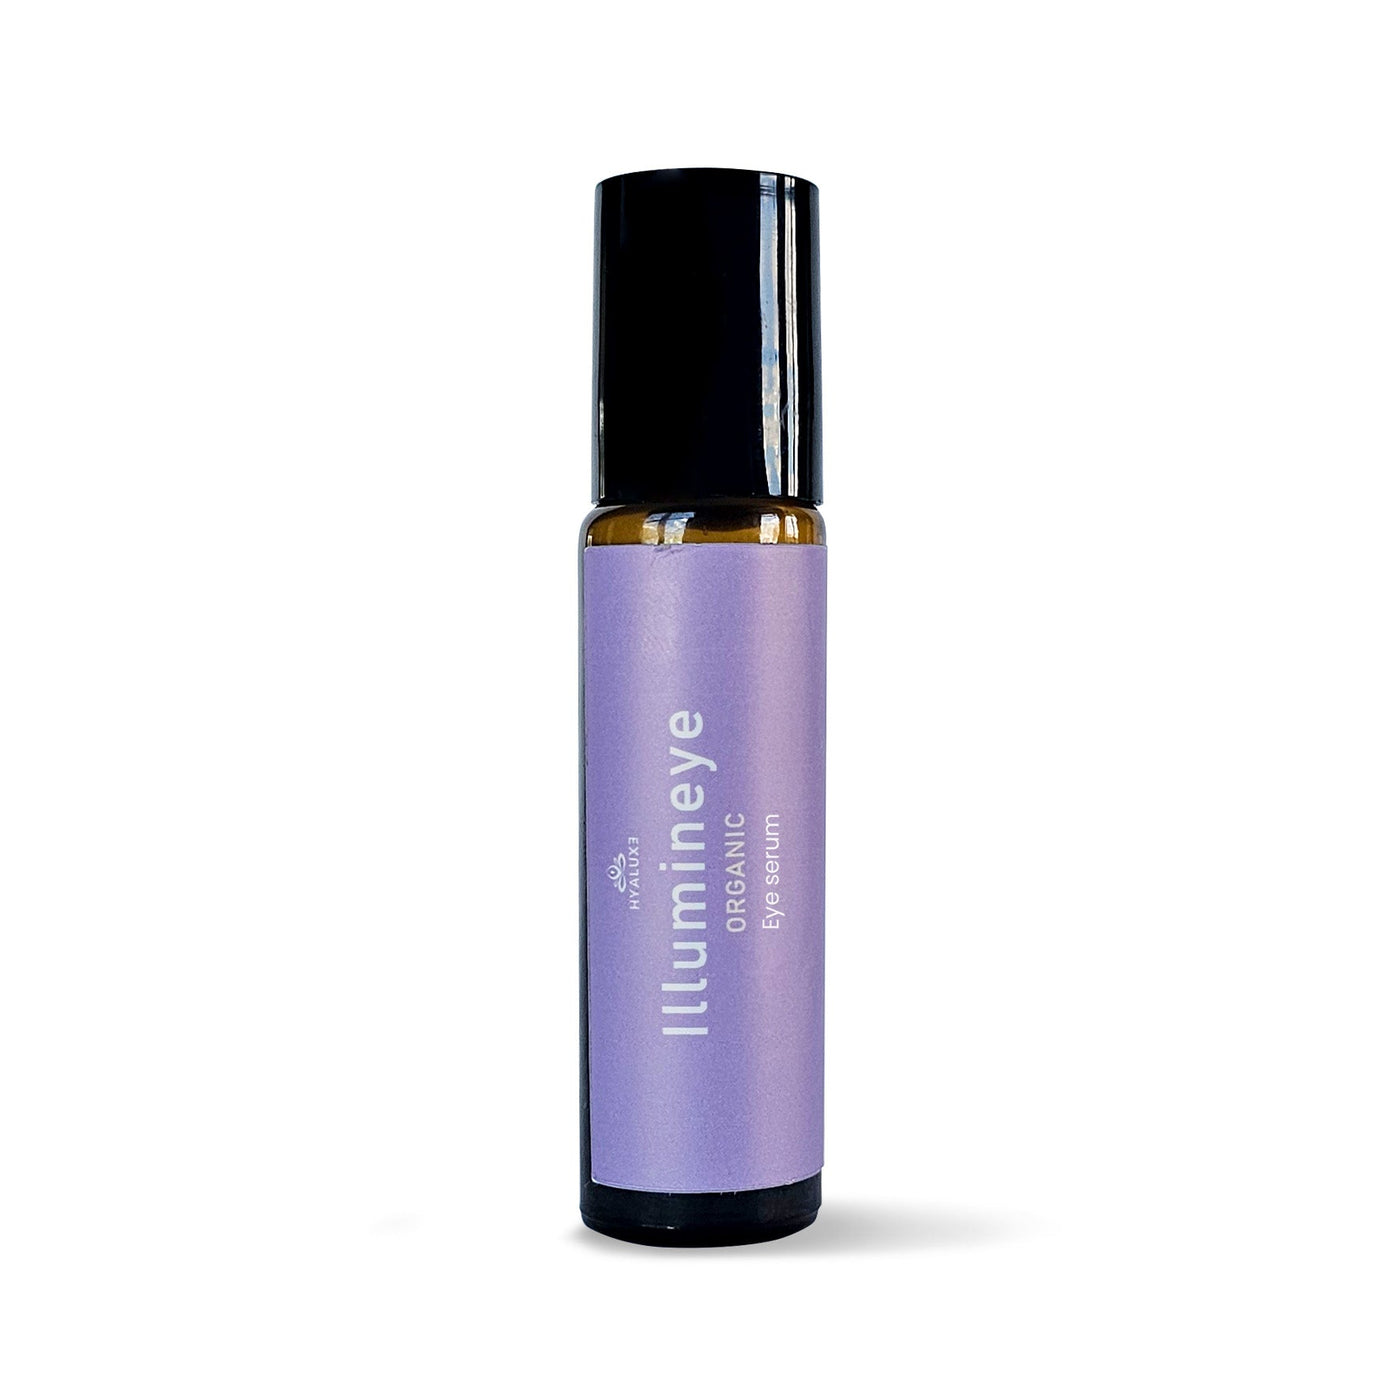 NEW ILLUMINEYE: Roll on Enhanced Castor Blend for Puffiness, dark circles and fine lines - Hyaluxe Body